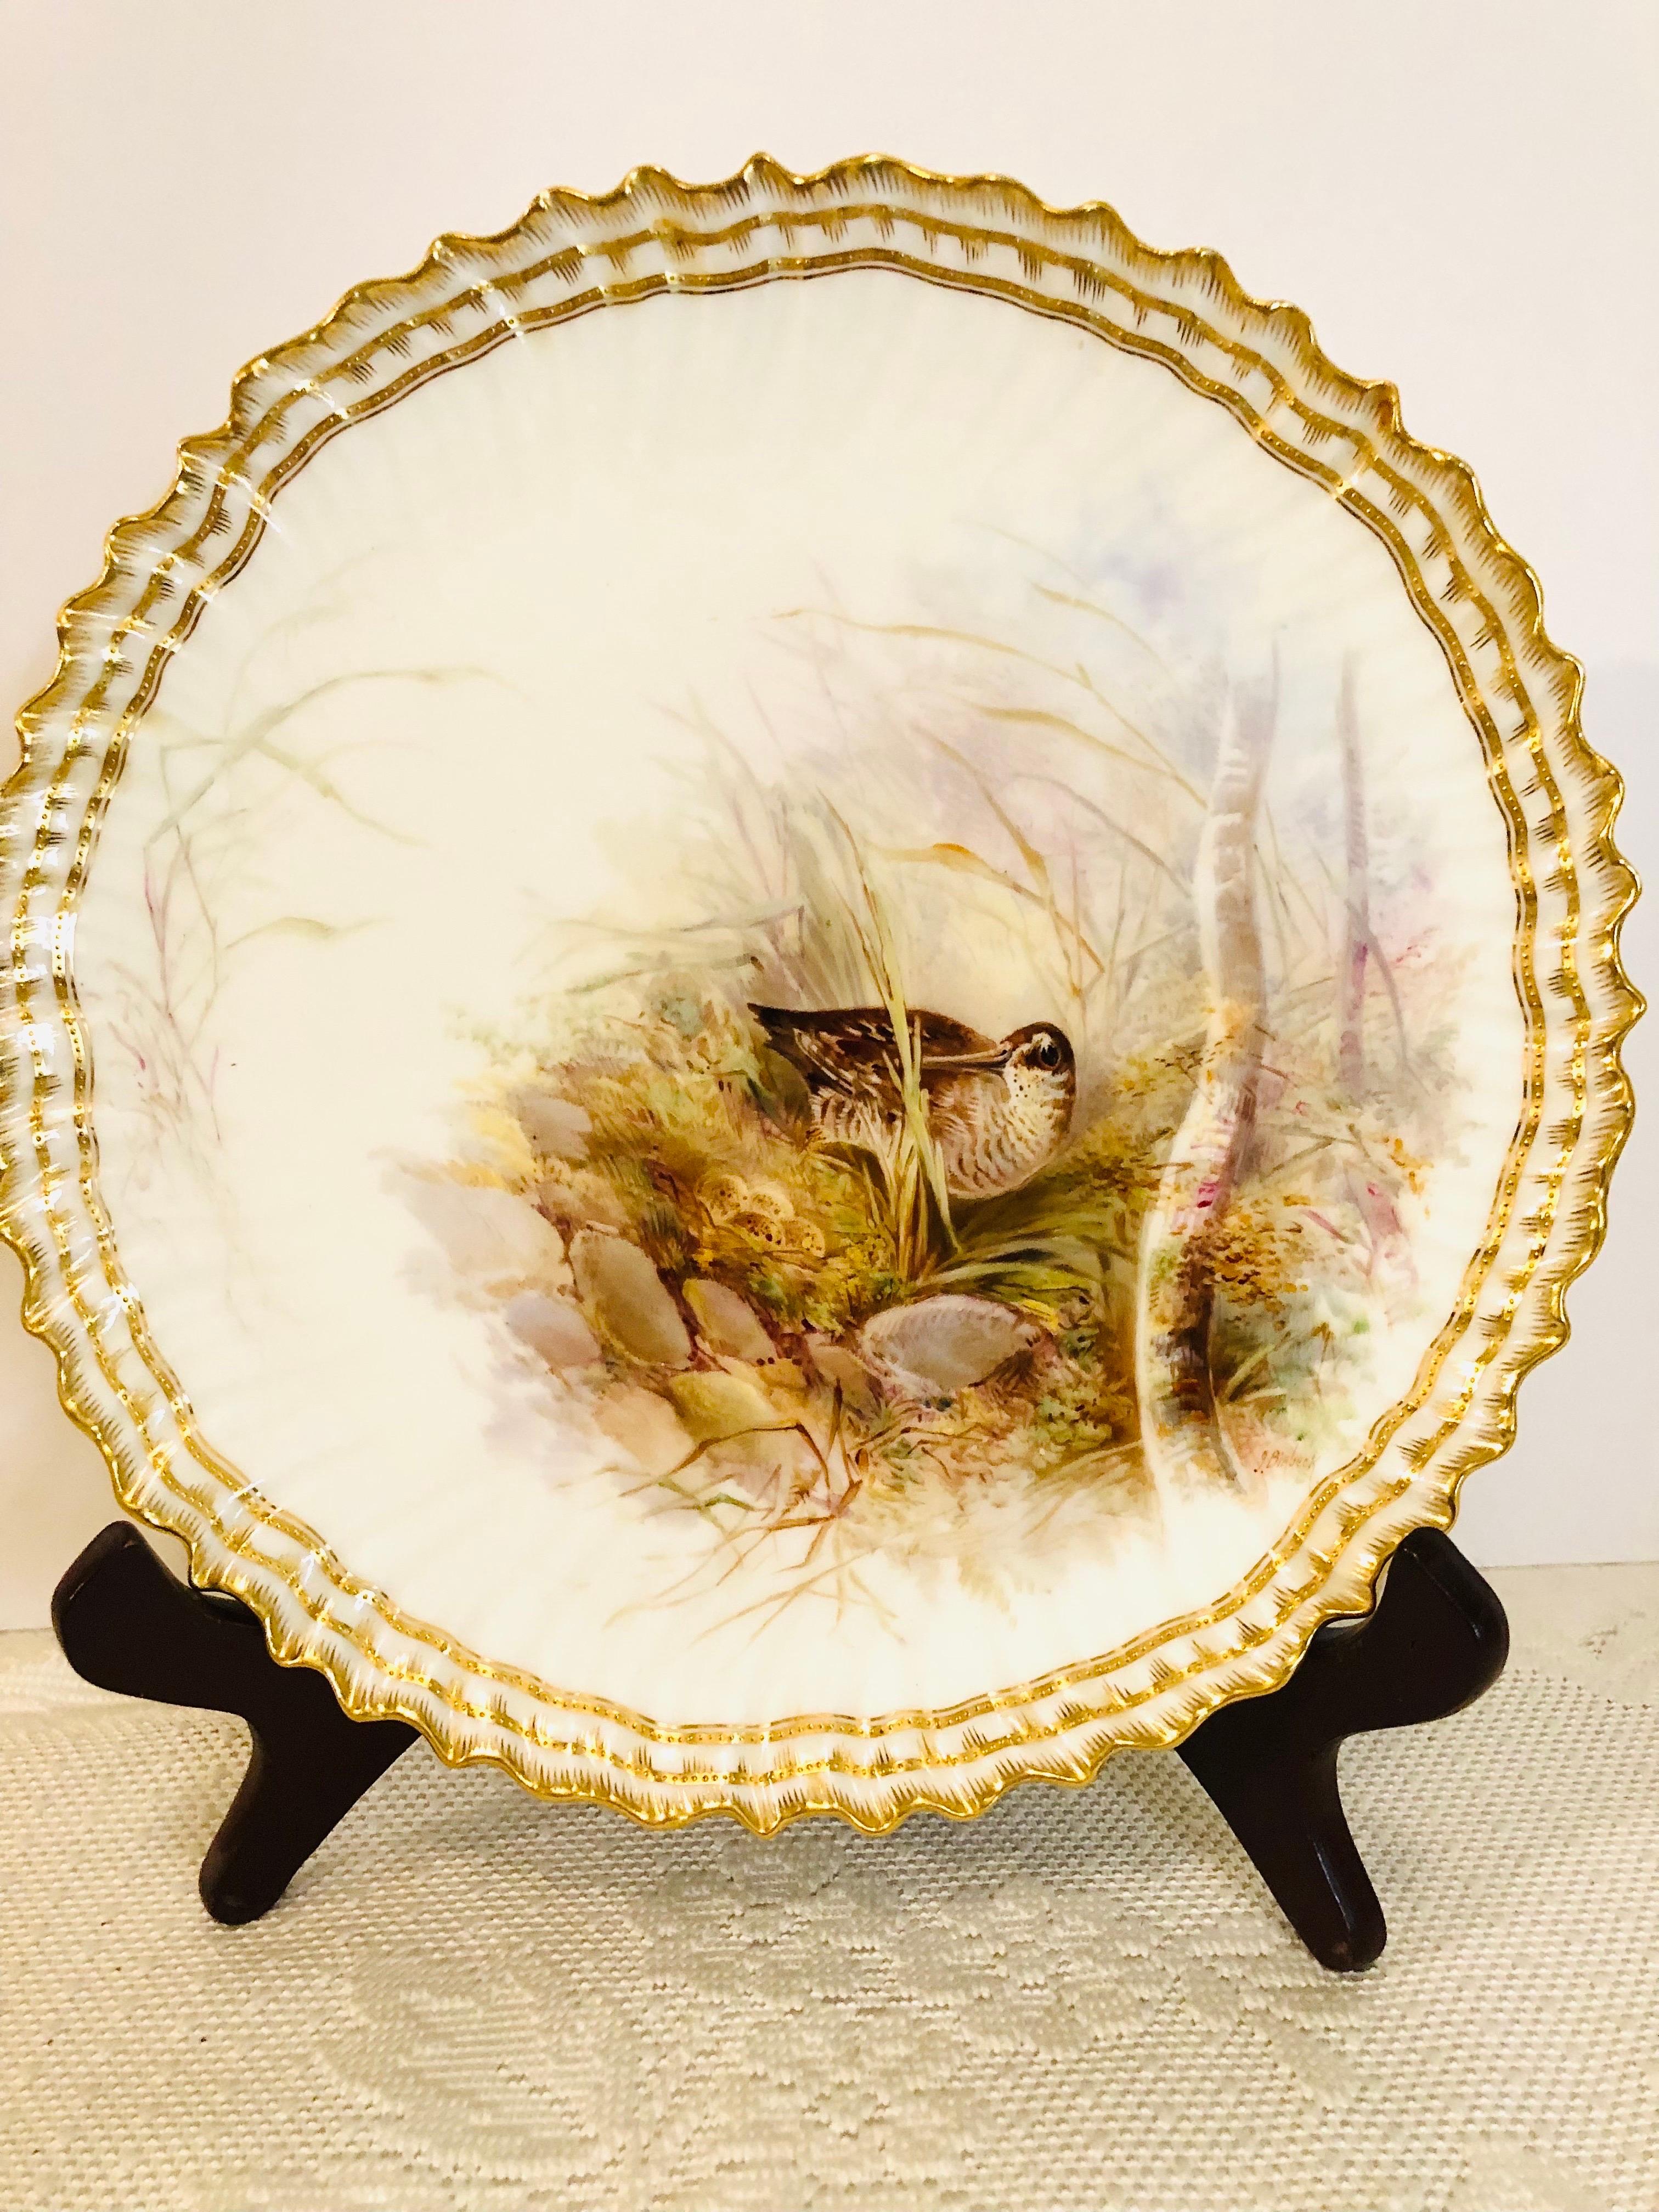 Set of 11 Cauldon Plates Each Painted Exquisitely With a Different Bird  3